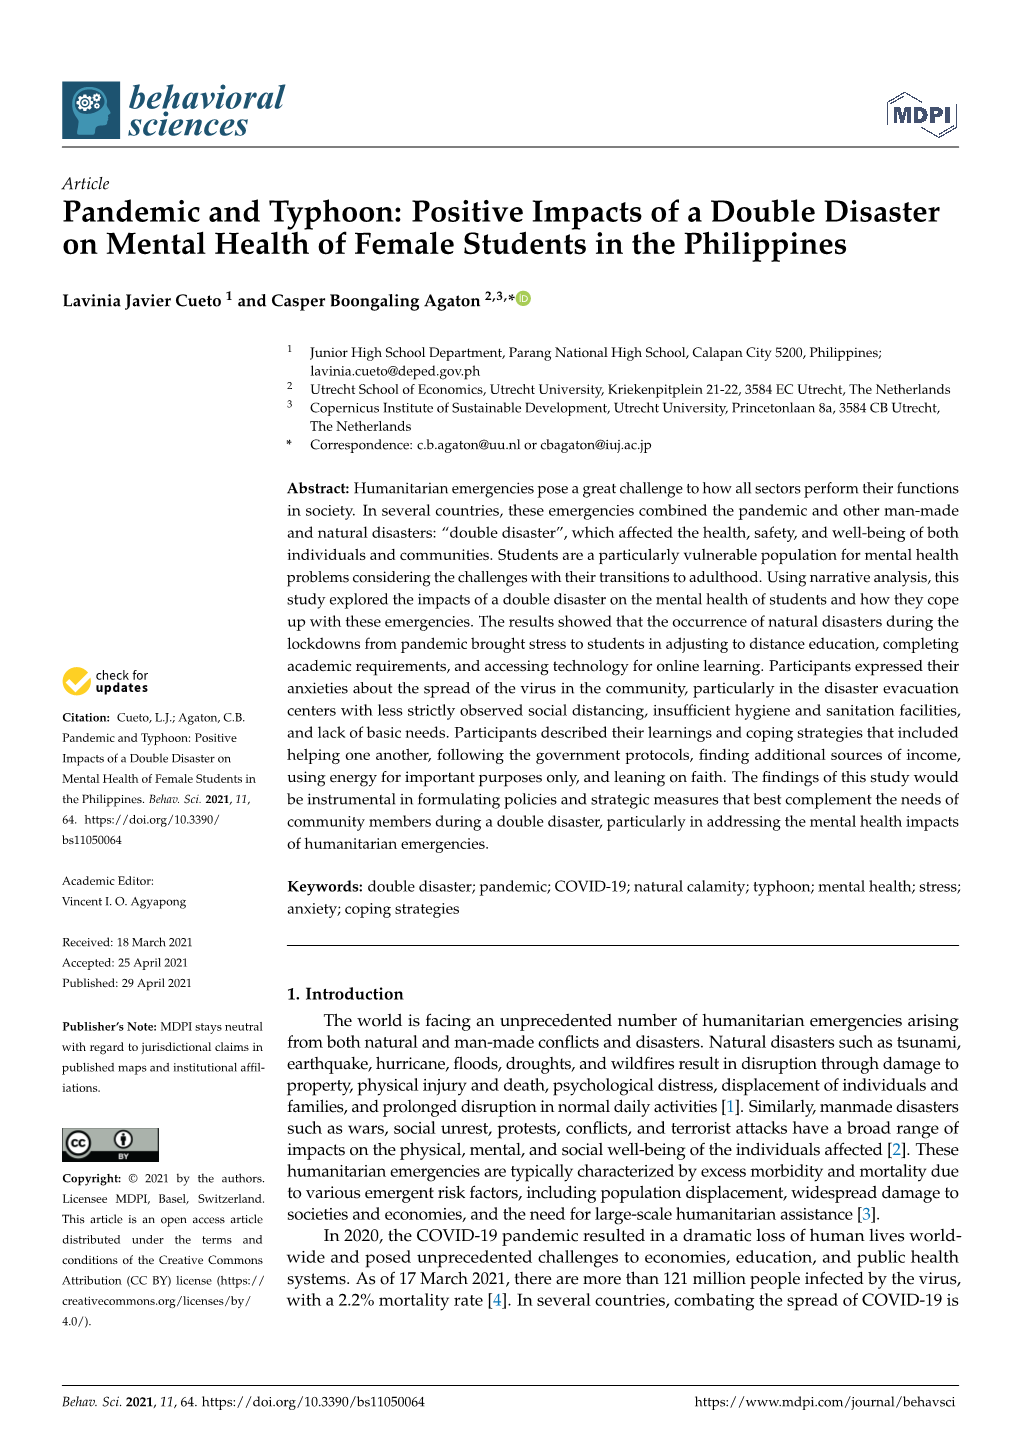 Pandemic and Typhoon: Positive Impacts of a Double Disaster on Mental Health of Female Students in the Philippines